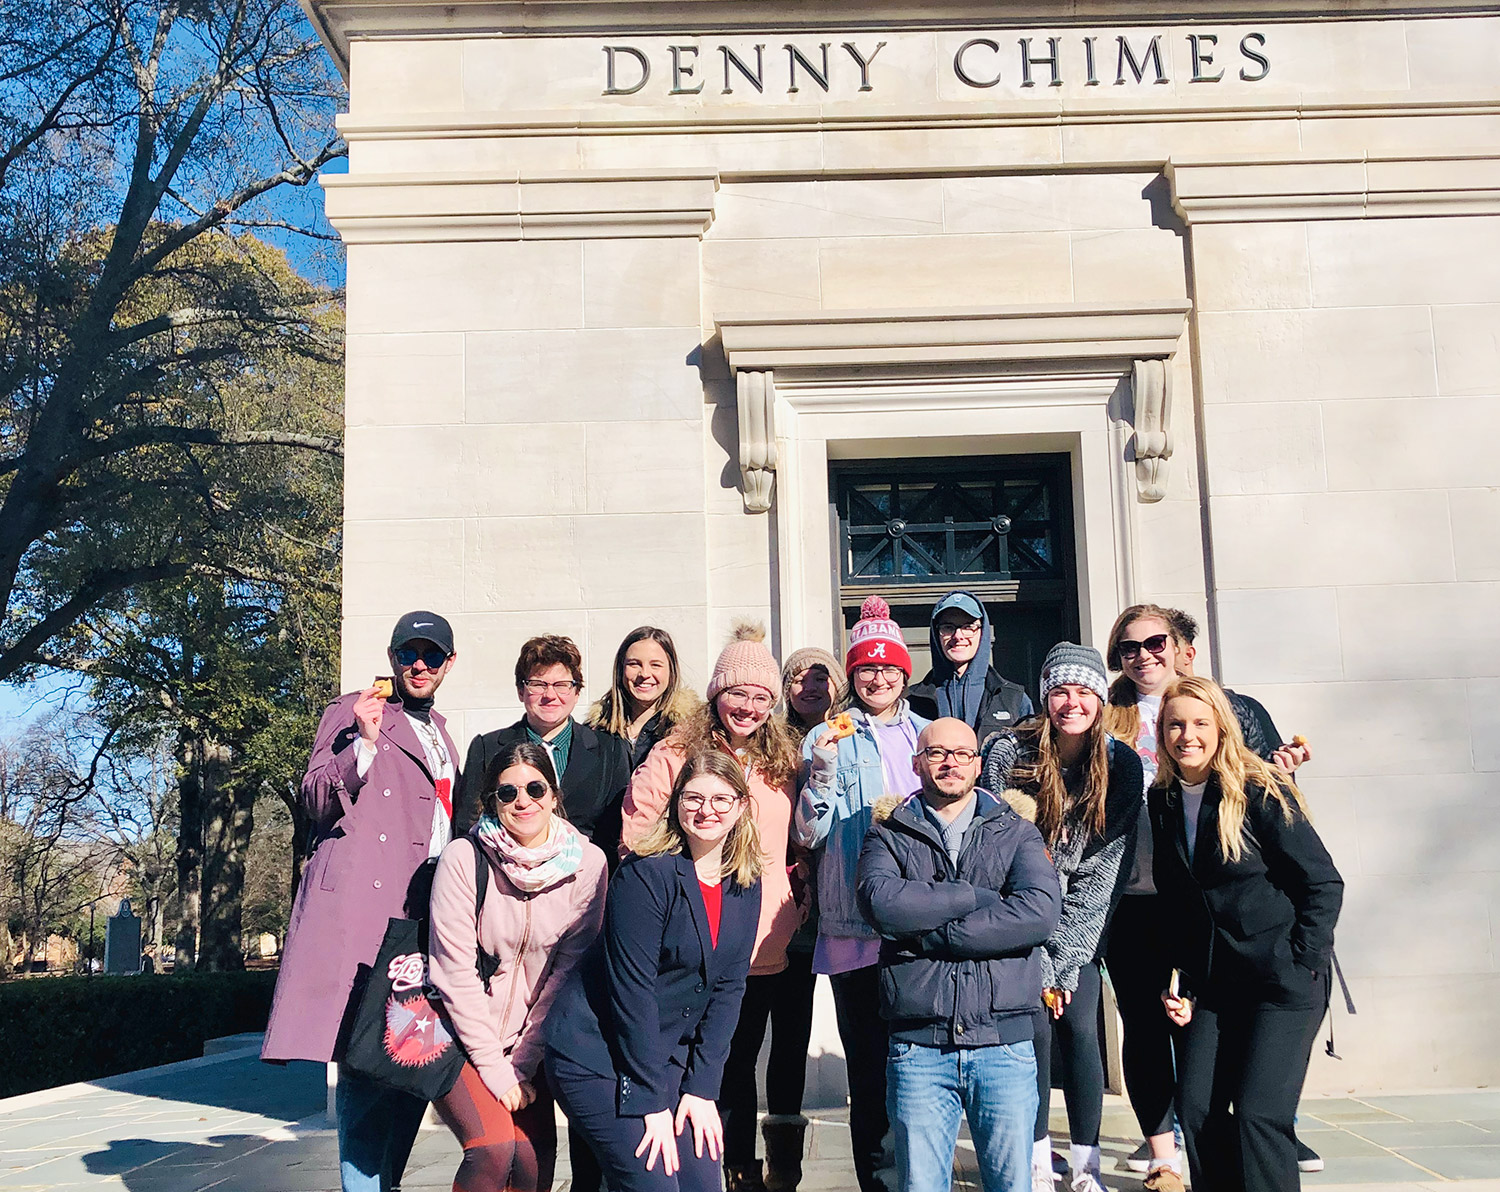 students posing in front of Denny Chimes